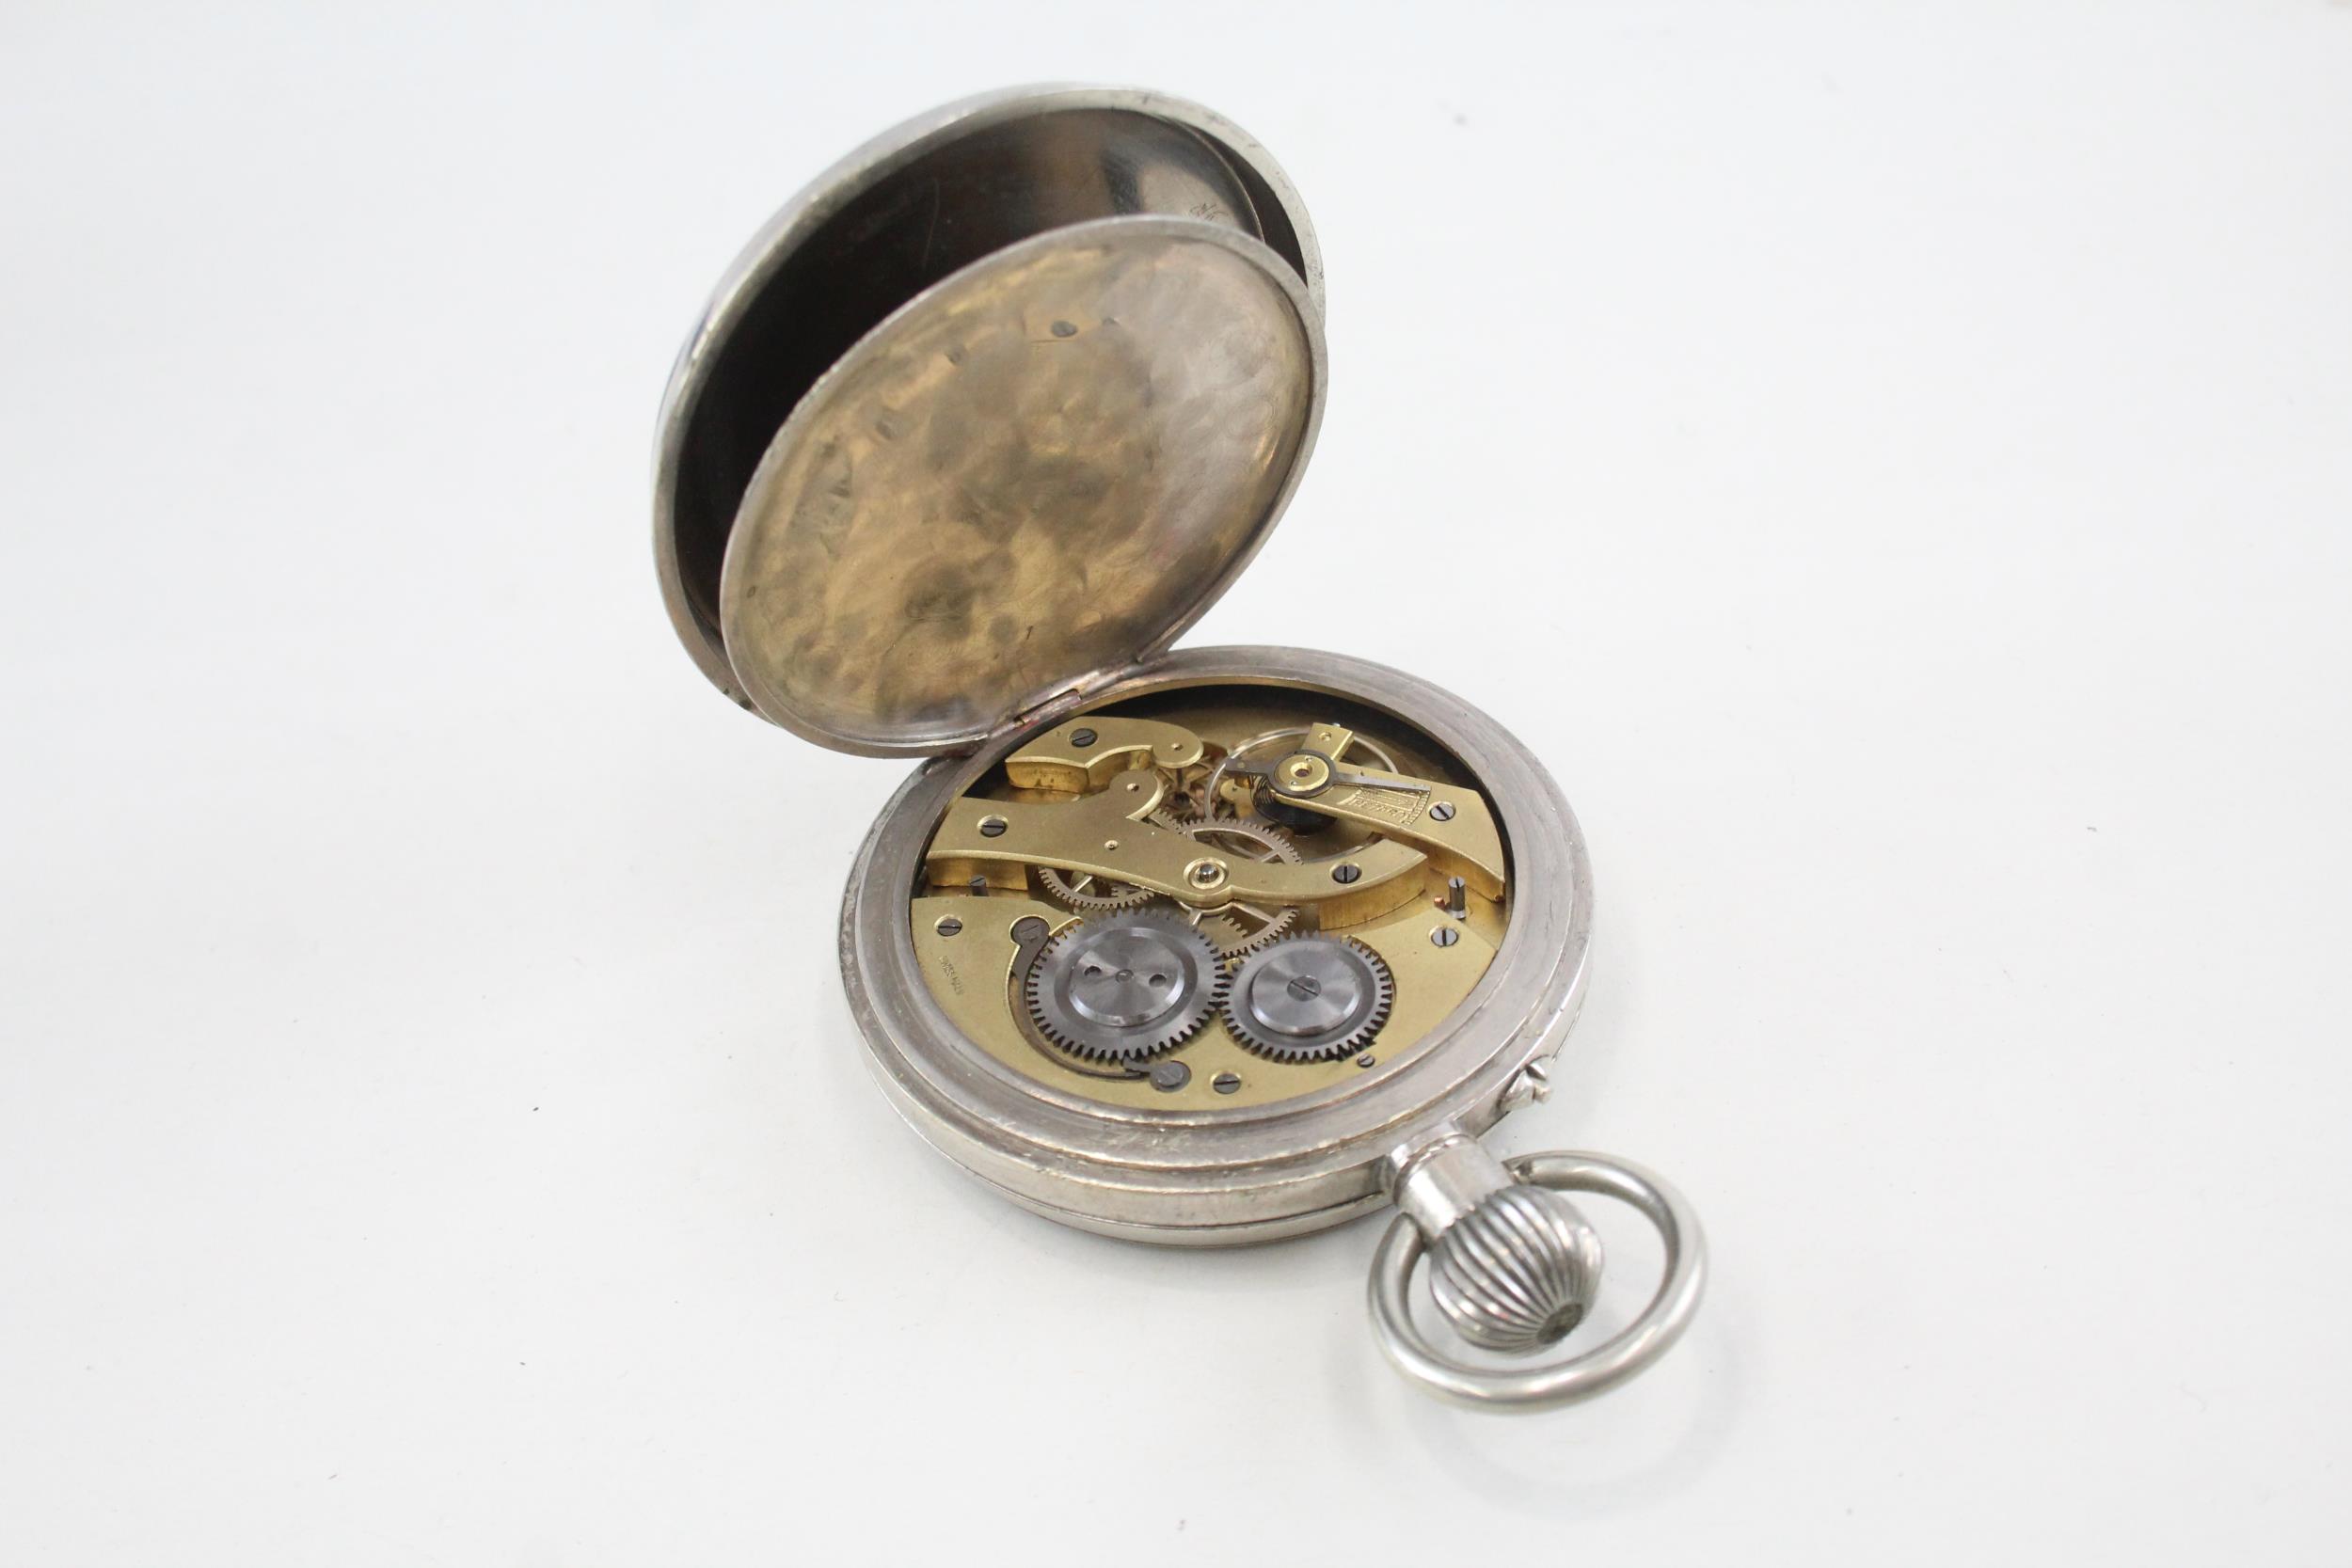 Vintage Jumbo Open Face Pocket Watch w/ Silver Fronted Case Hand-Wind WORKING - Vintage Jumbo Open - Image 5 of 6